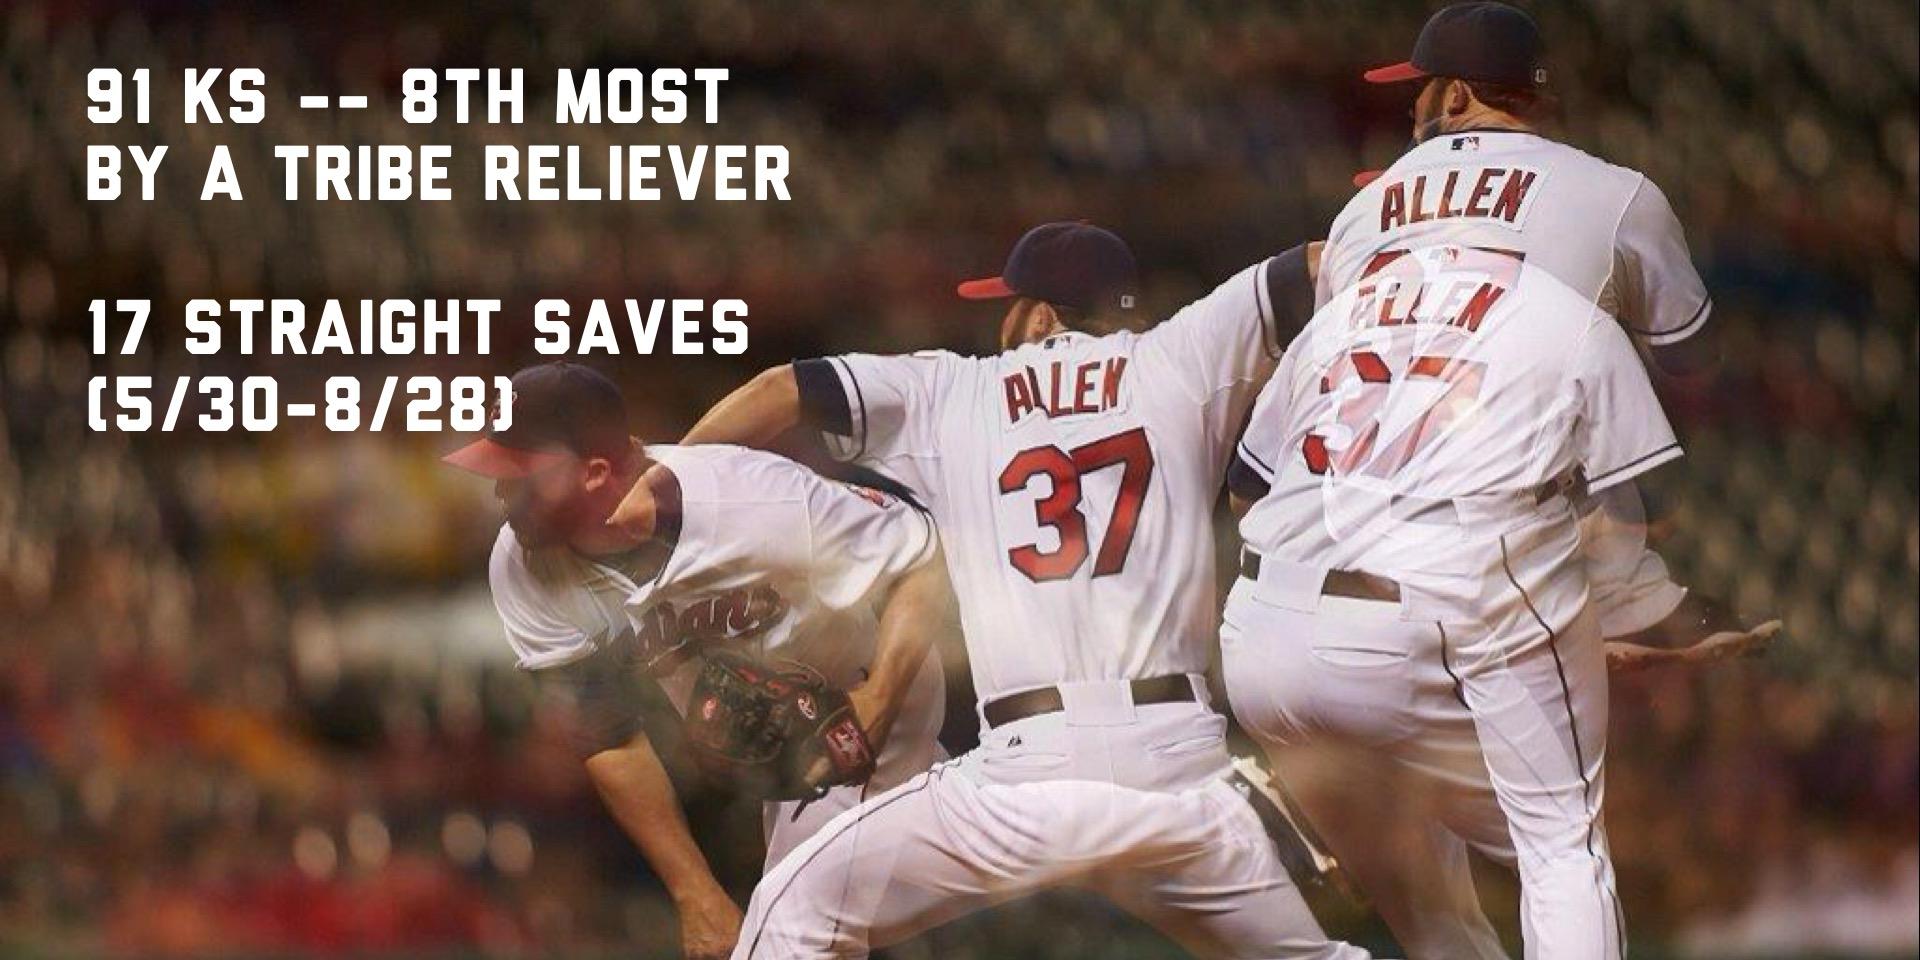 Happy 26th birthday to Tribe closer Cody Allen, one of the best young relievers in the game! 